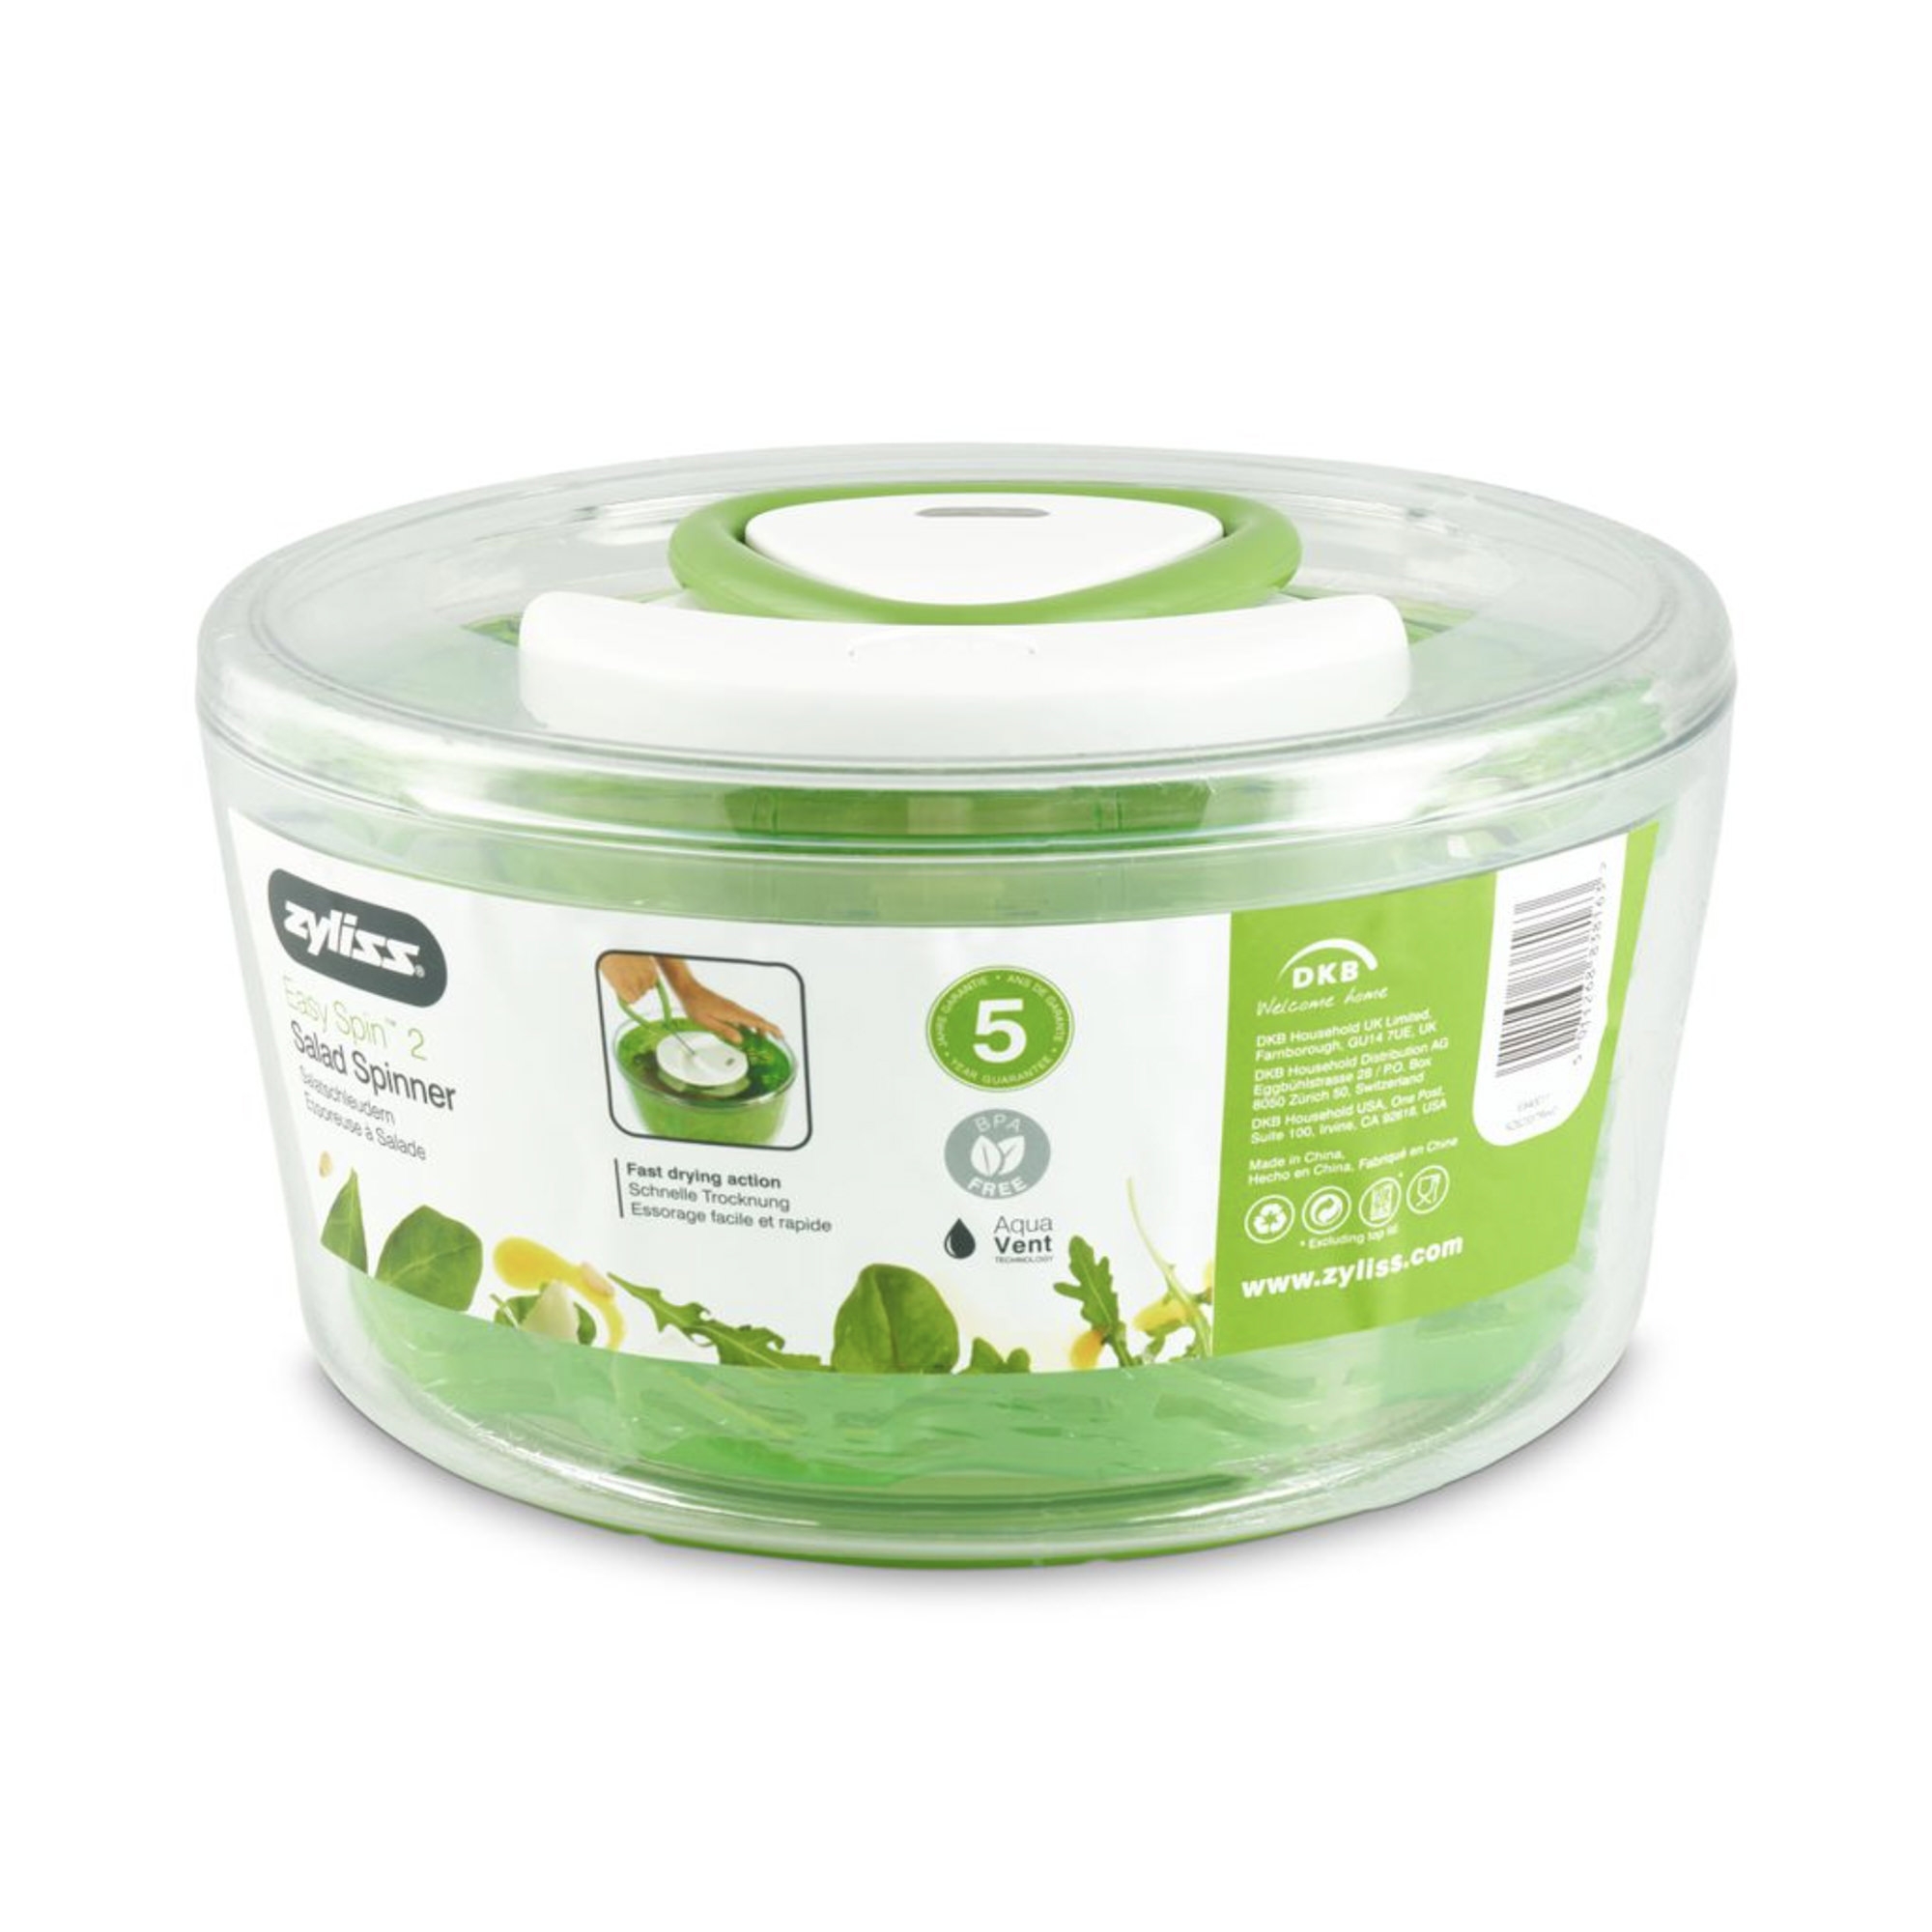 Zyliss Easy Spin 2 Salad Spinner Small Green Image 2